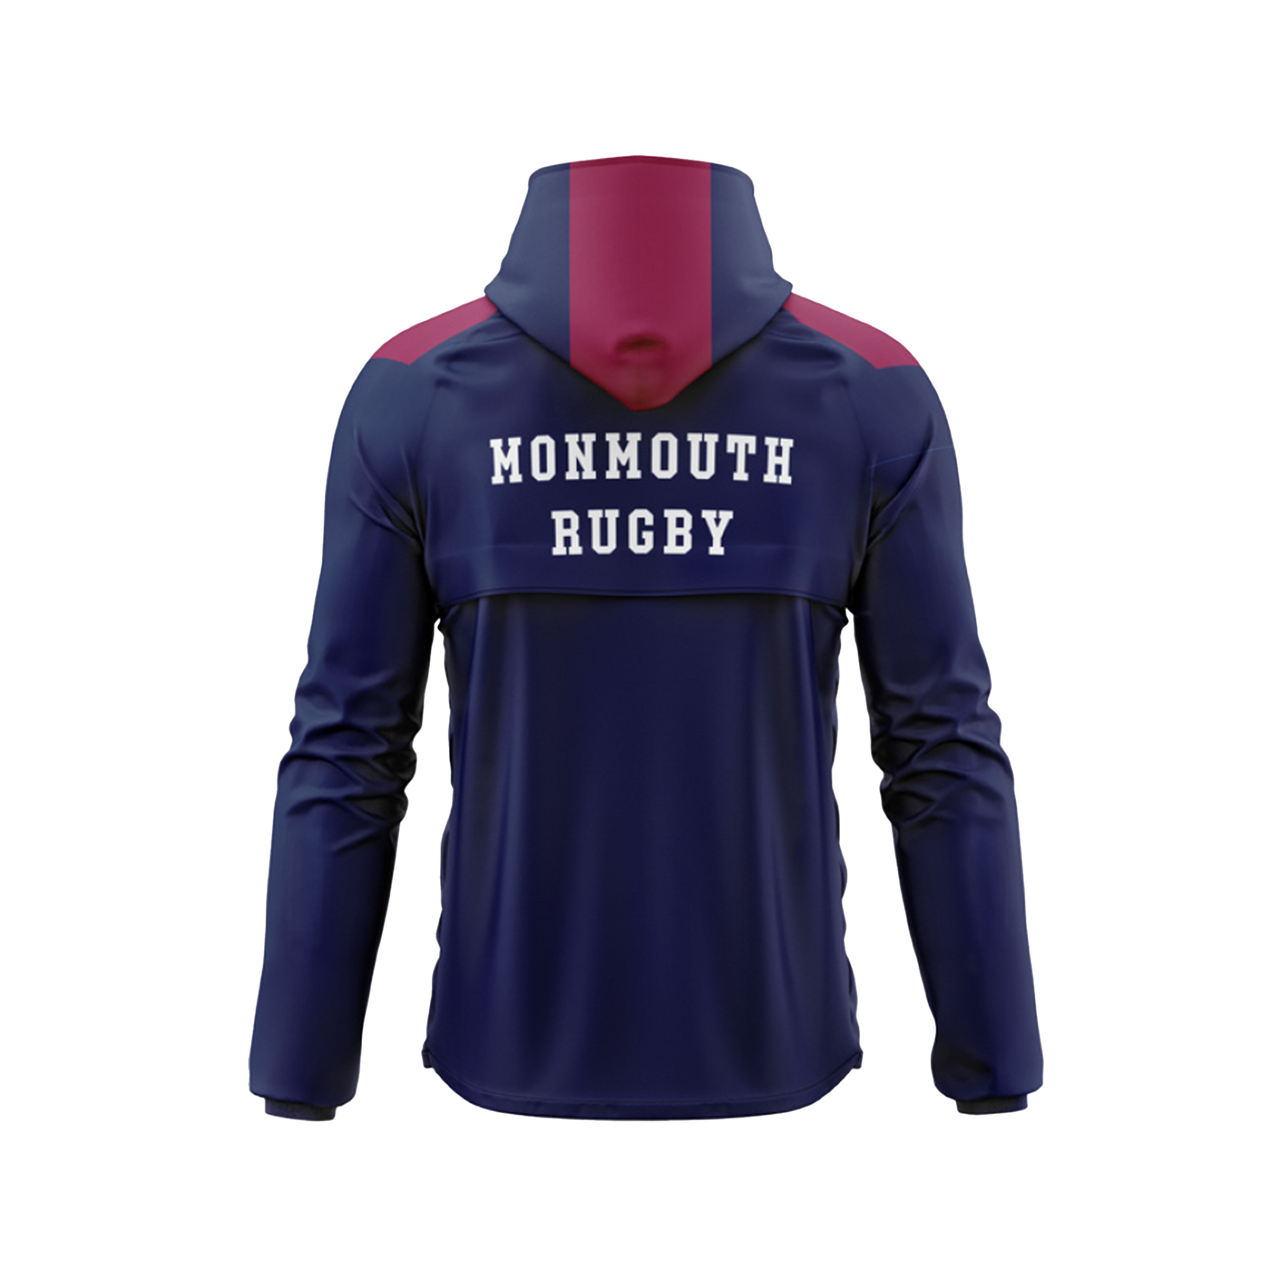 Monmouth Rugby Warm Up Jacket